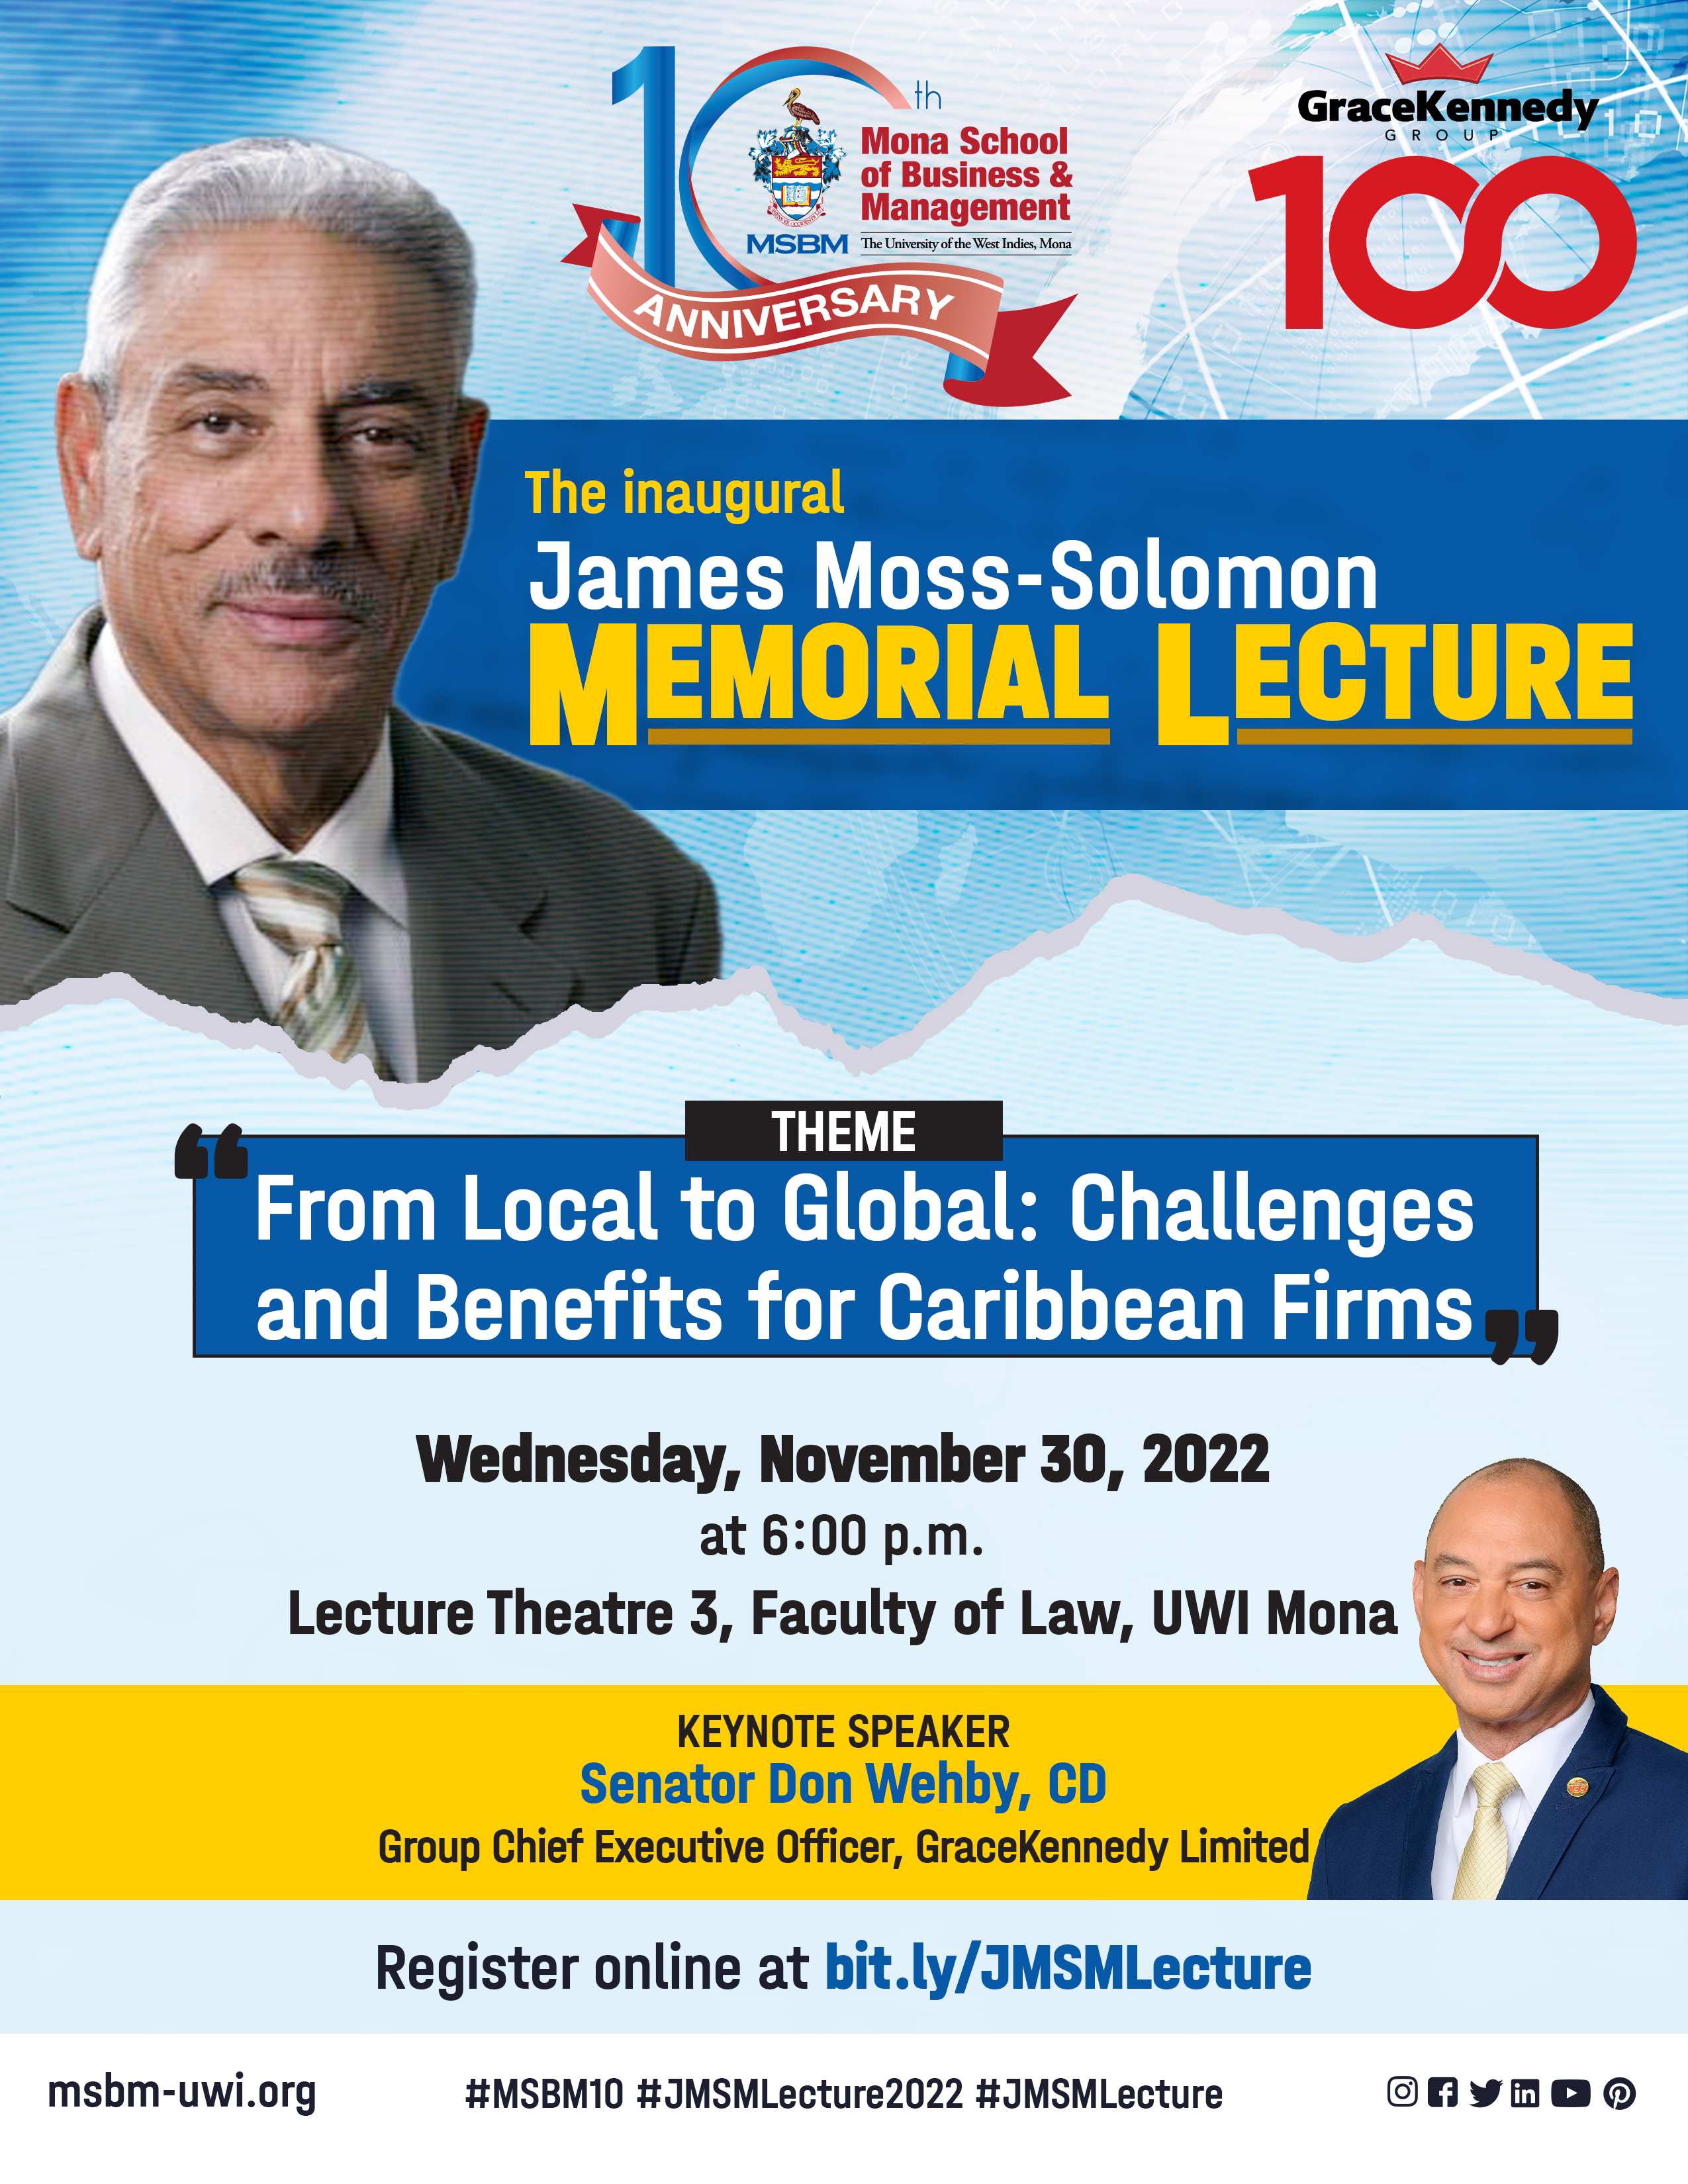 DON WEHBY TO DELIVER MSBM'S INAUGURAL JAMES MOSS-SOLOMON MEMORIAL LECTURE AT THE UWI, NOVEMBER 30, 2022